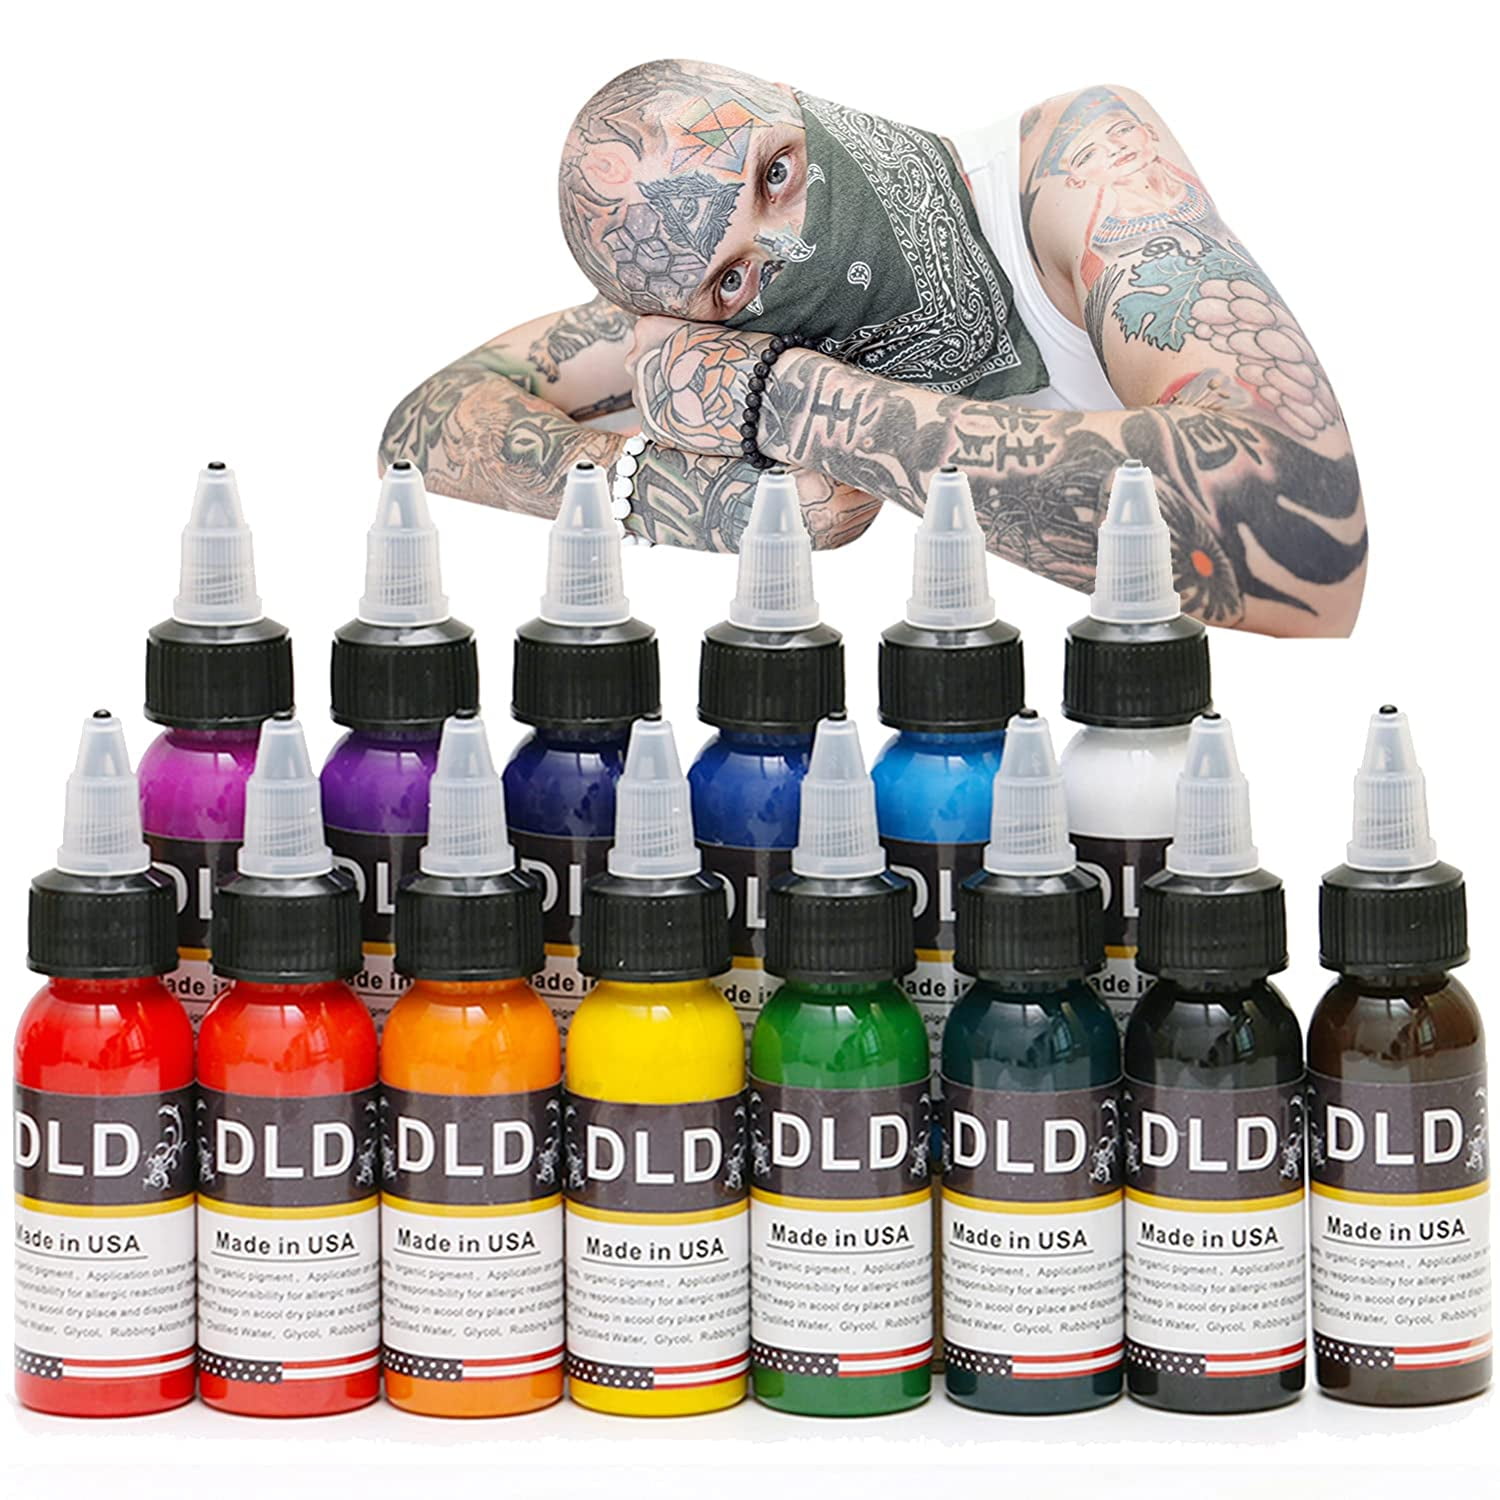 Professional Tattoo Inks Supply 14 Bottles, 1oz Black Pigment, 30ml Color  For Permanent Makeup From Yangzhiliang, $21.07